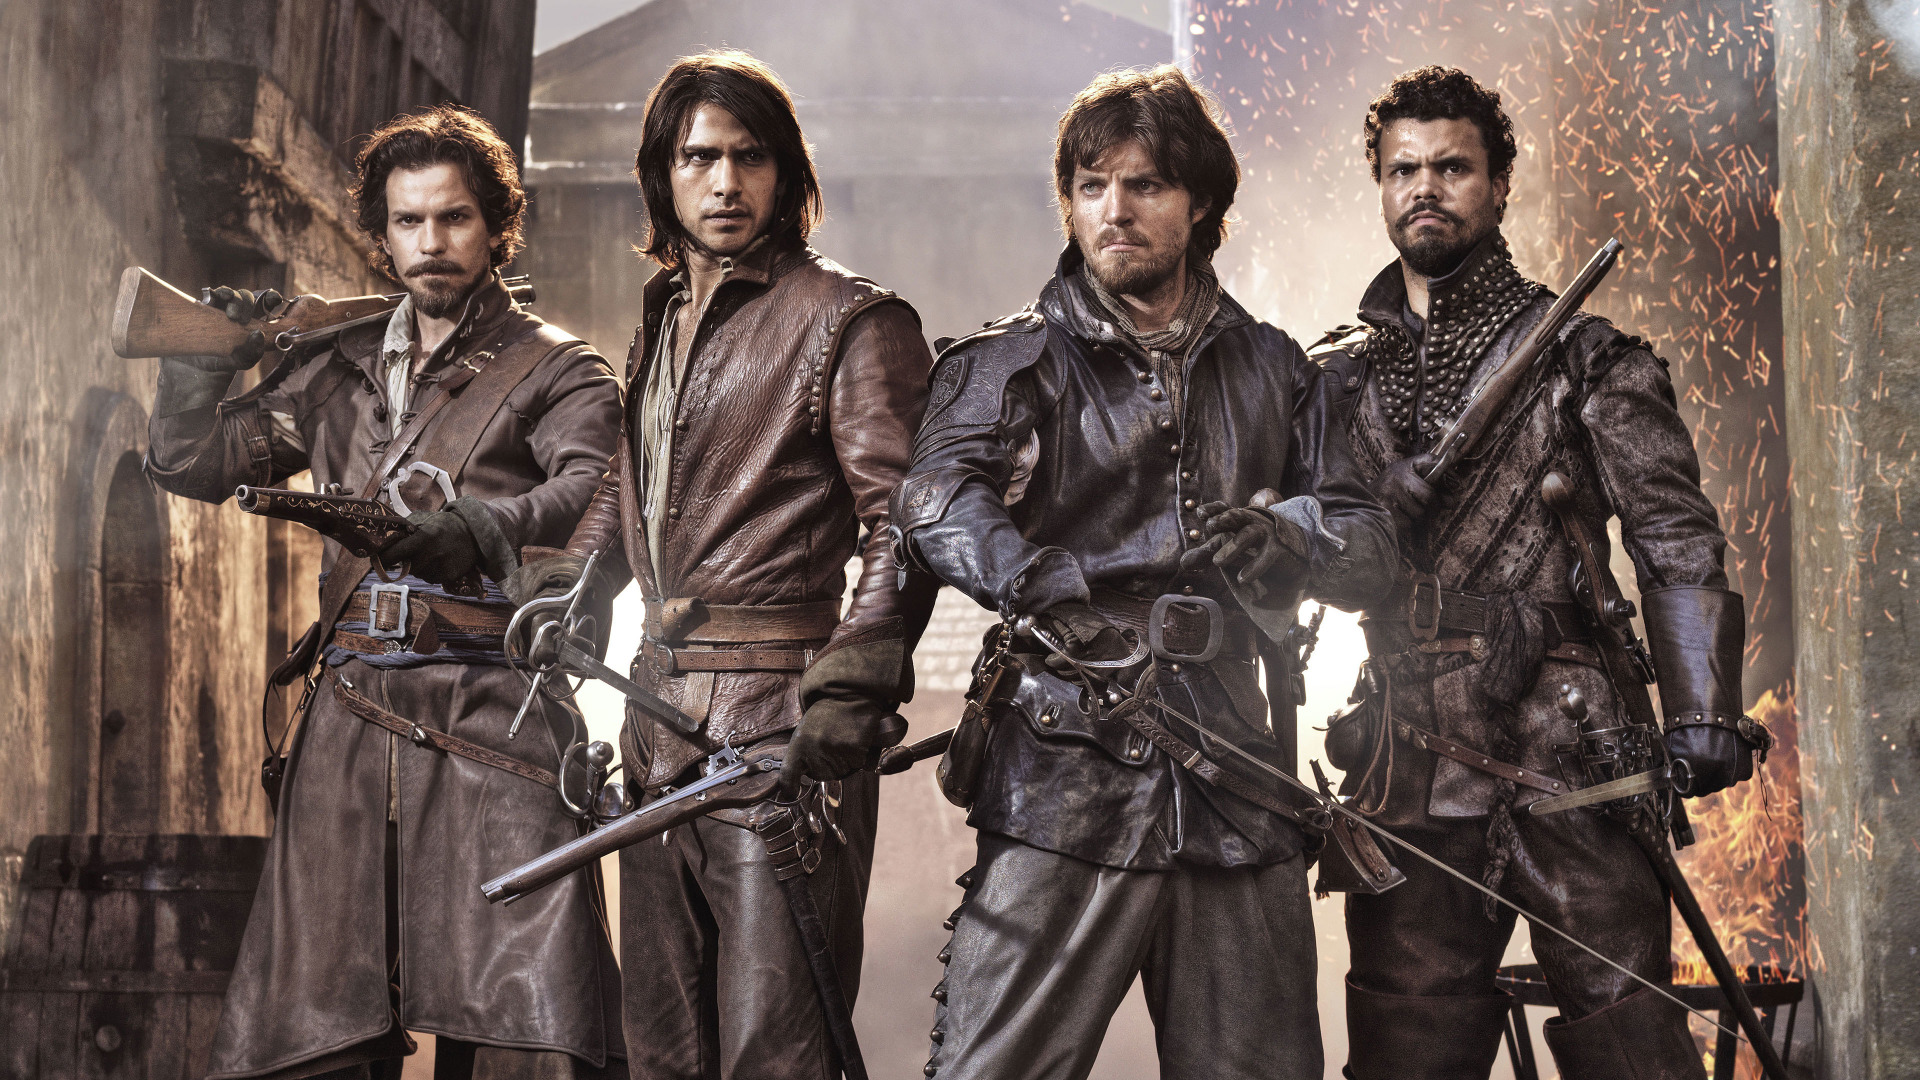 Show The Musketeers